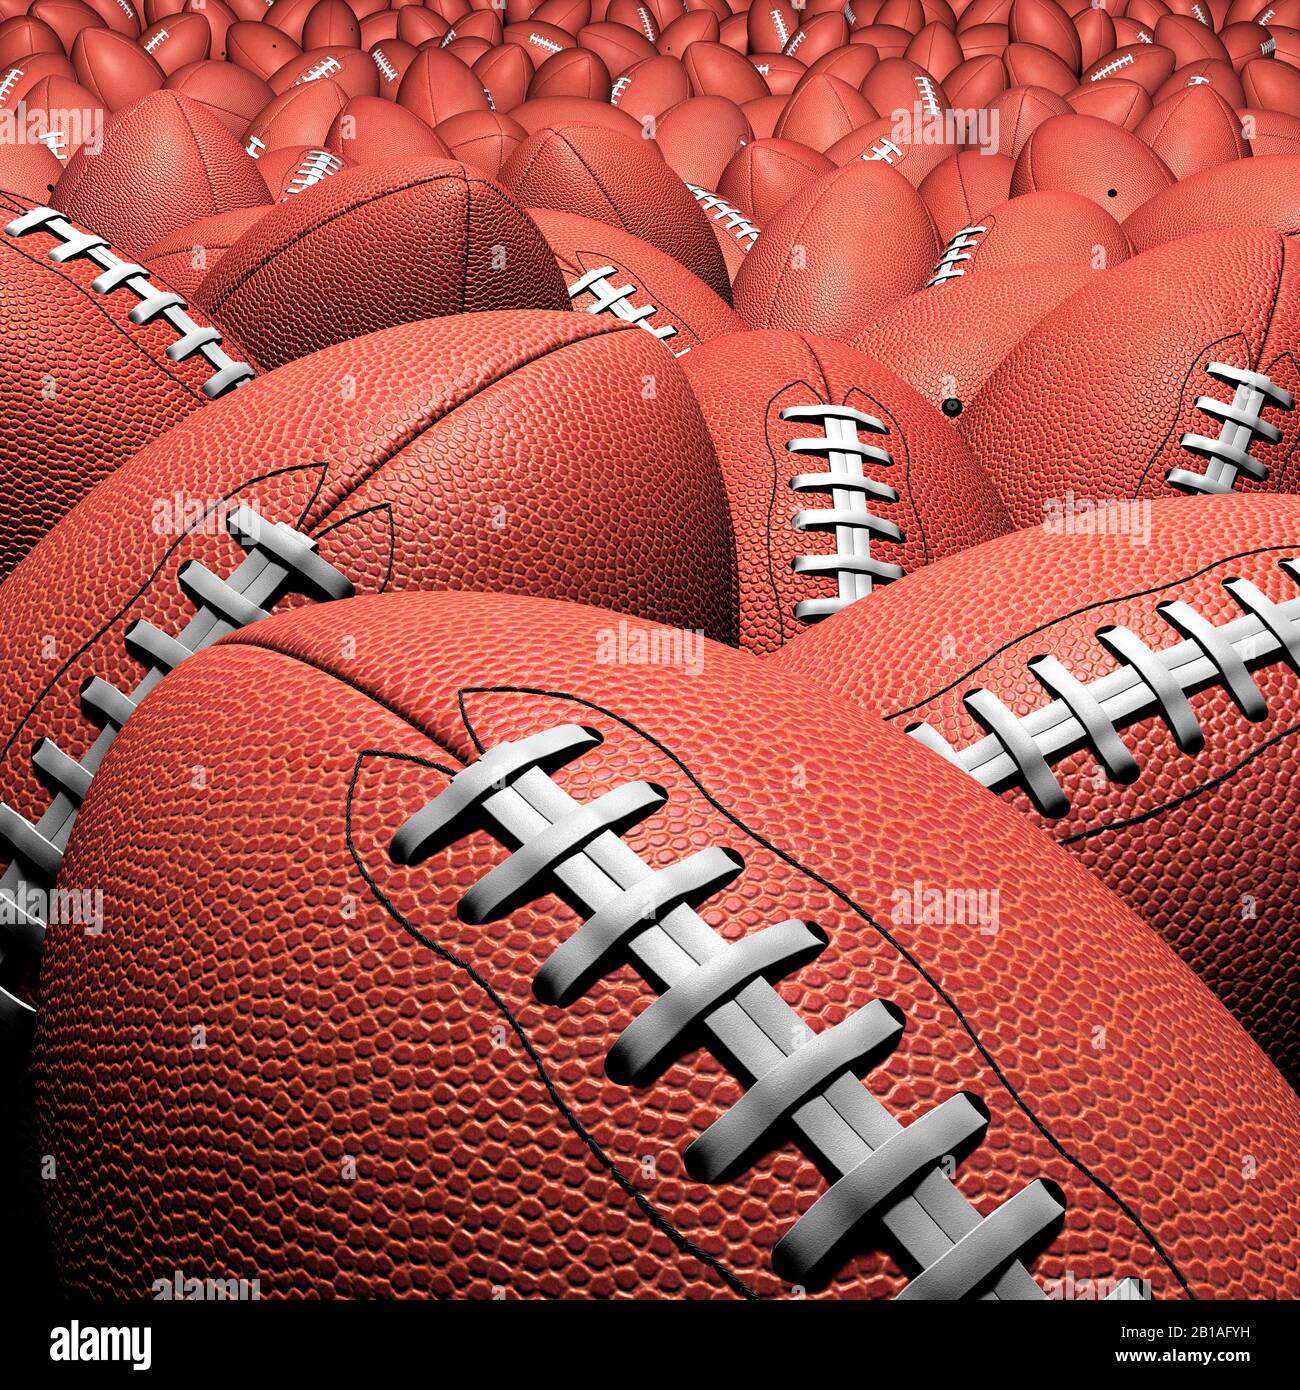 American football. US, gridiron, multiple balls stretching into infinity Americana. Close up, Isolated. Pigskin leather, laces Stock Photo